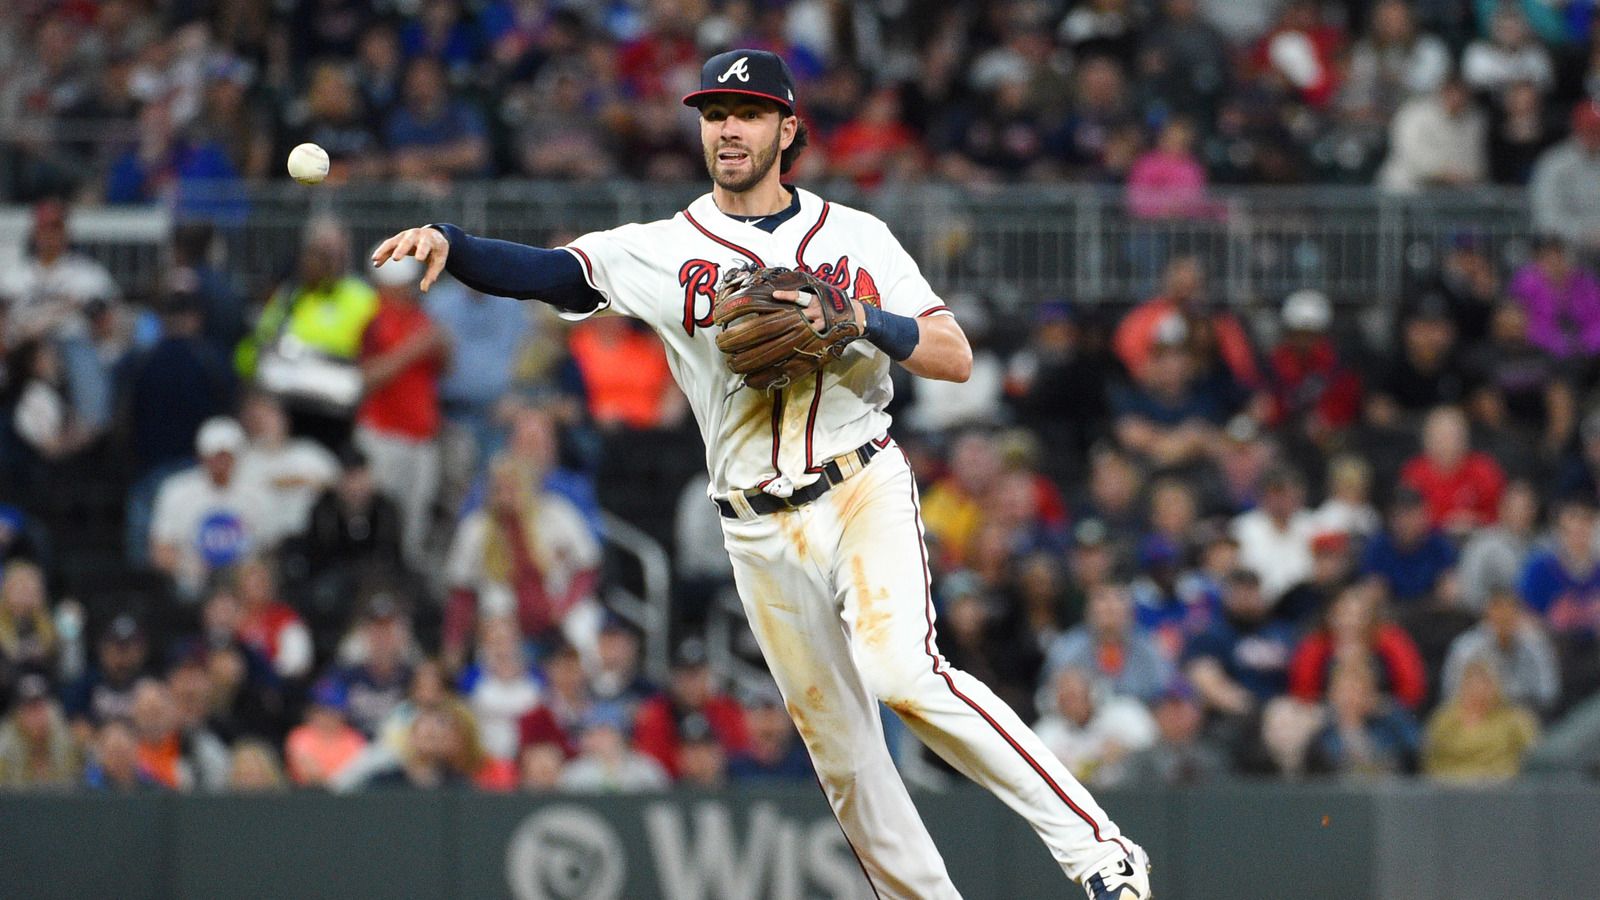 Braves Place Dansby Swanson On 10 Day DL